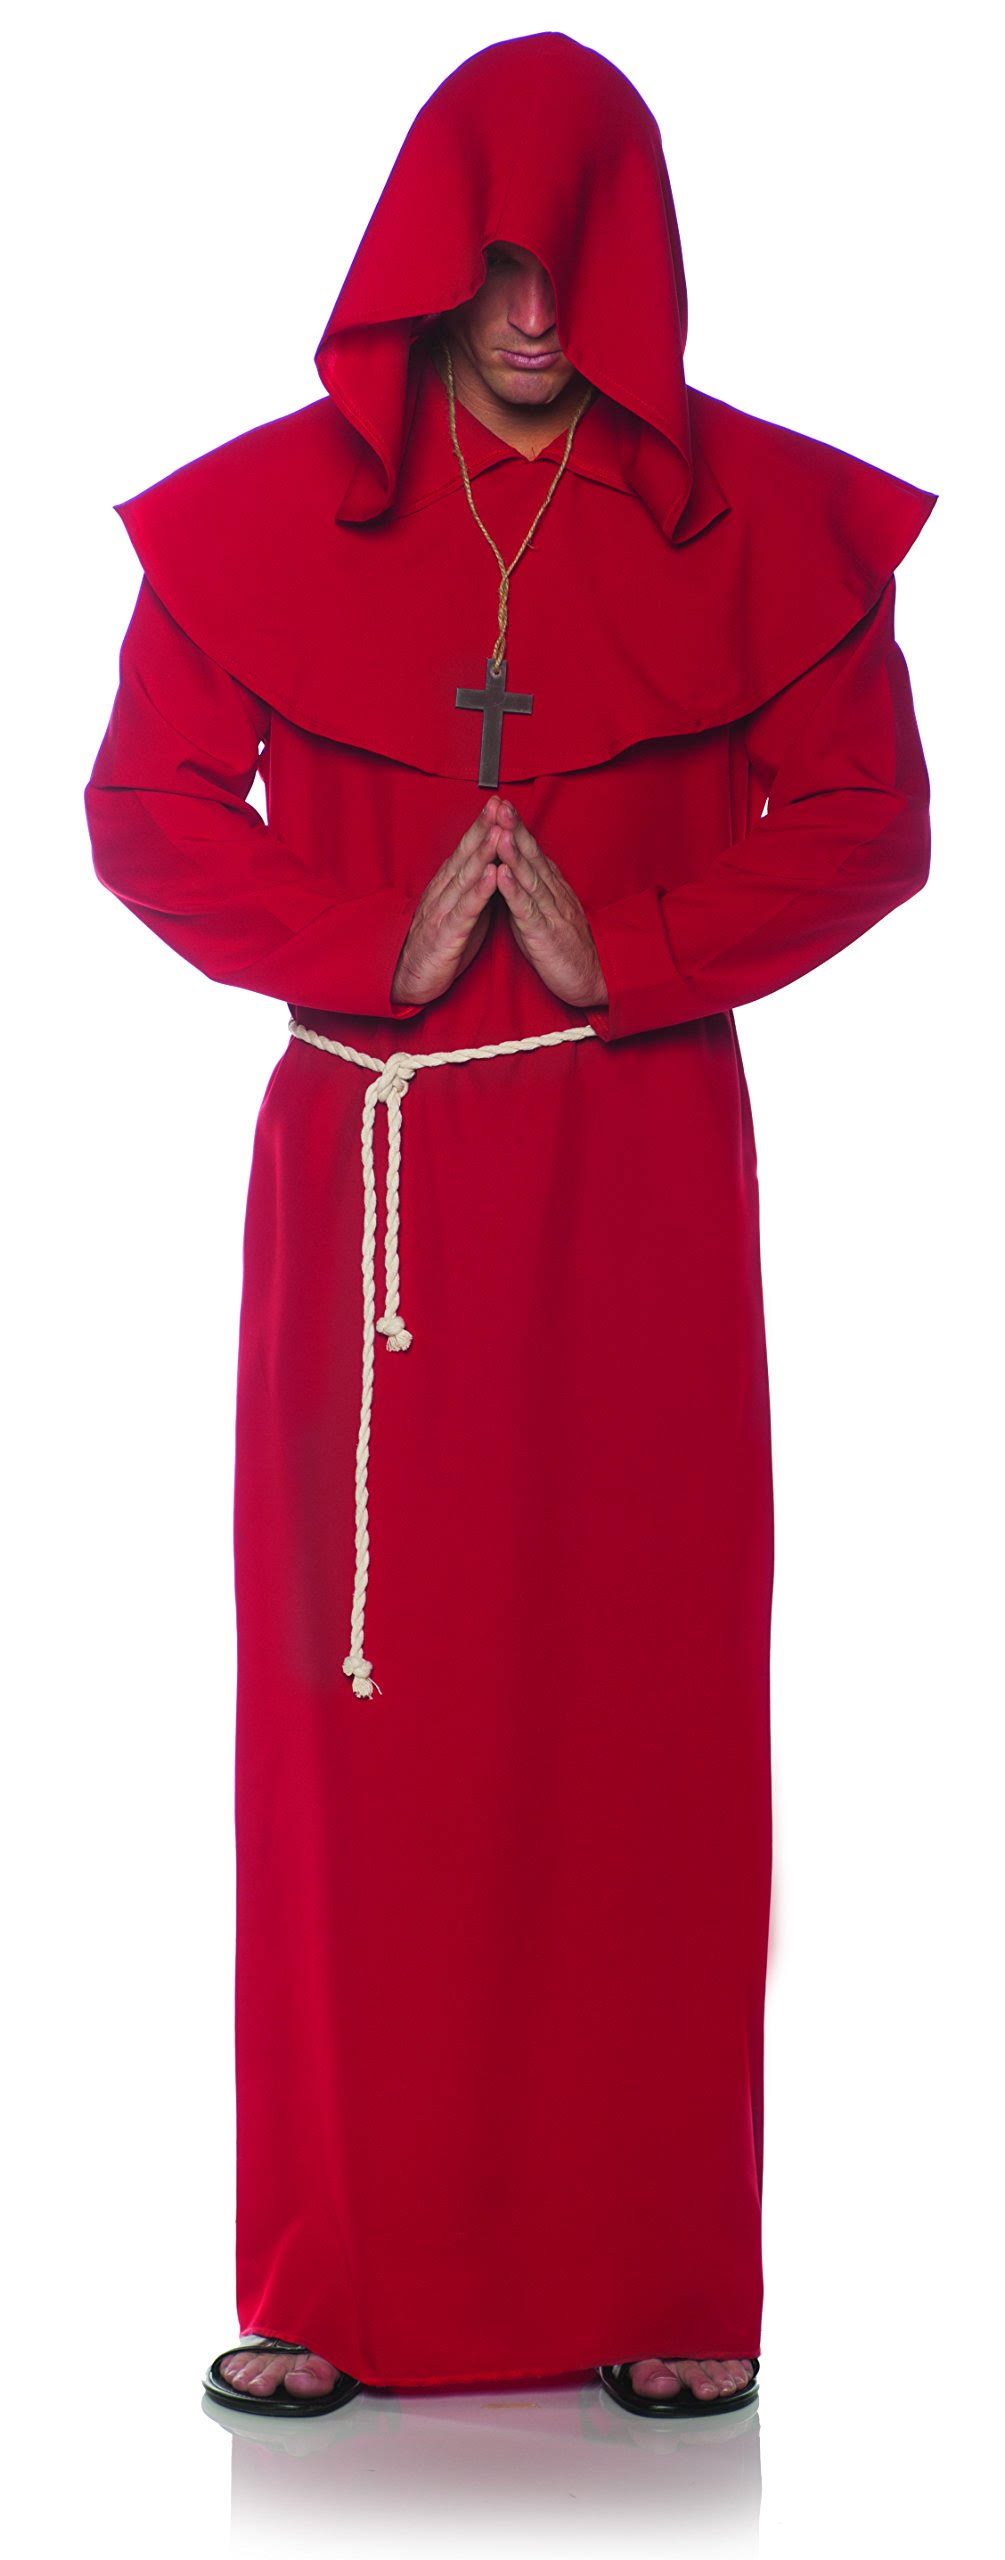 Hooded Red Monk Robe Men's Plus Size Costume XXLarge